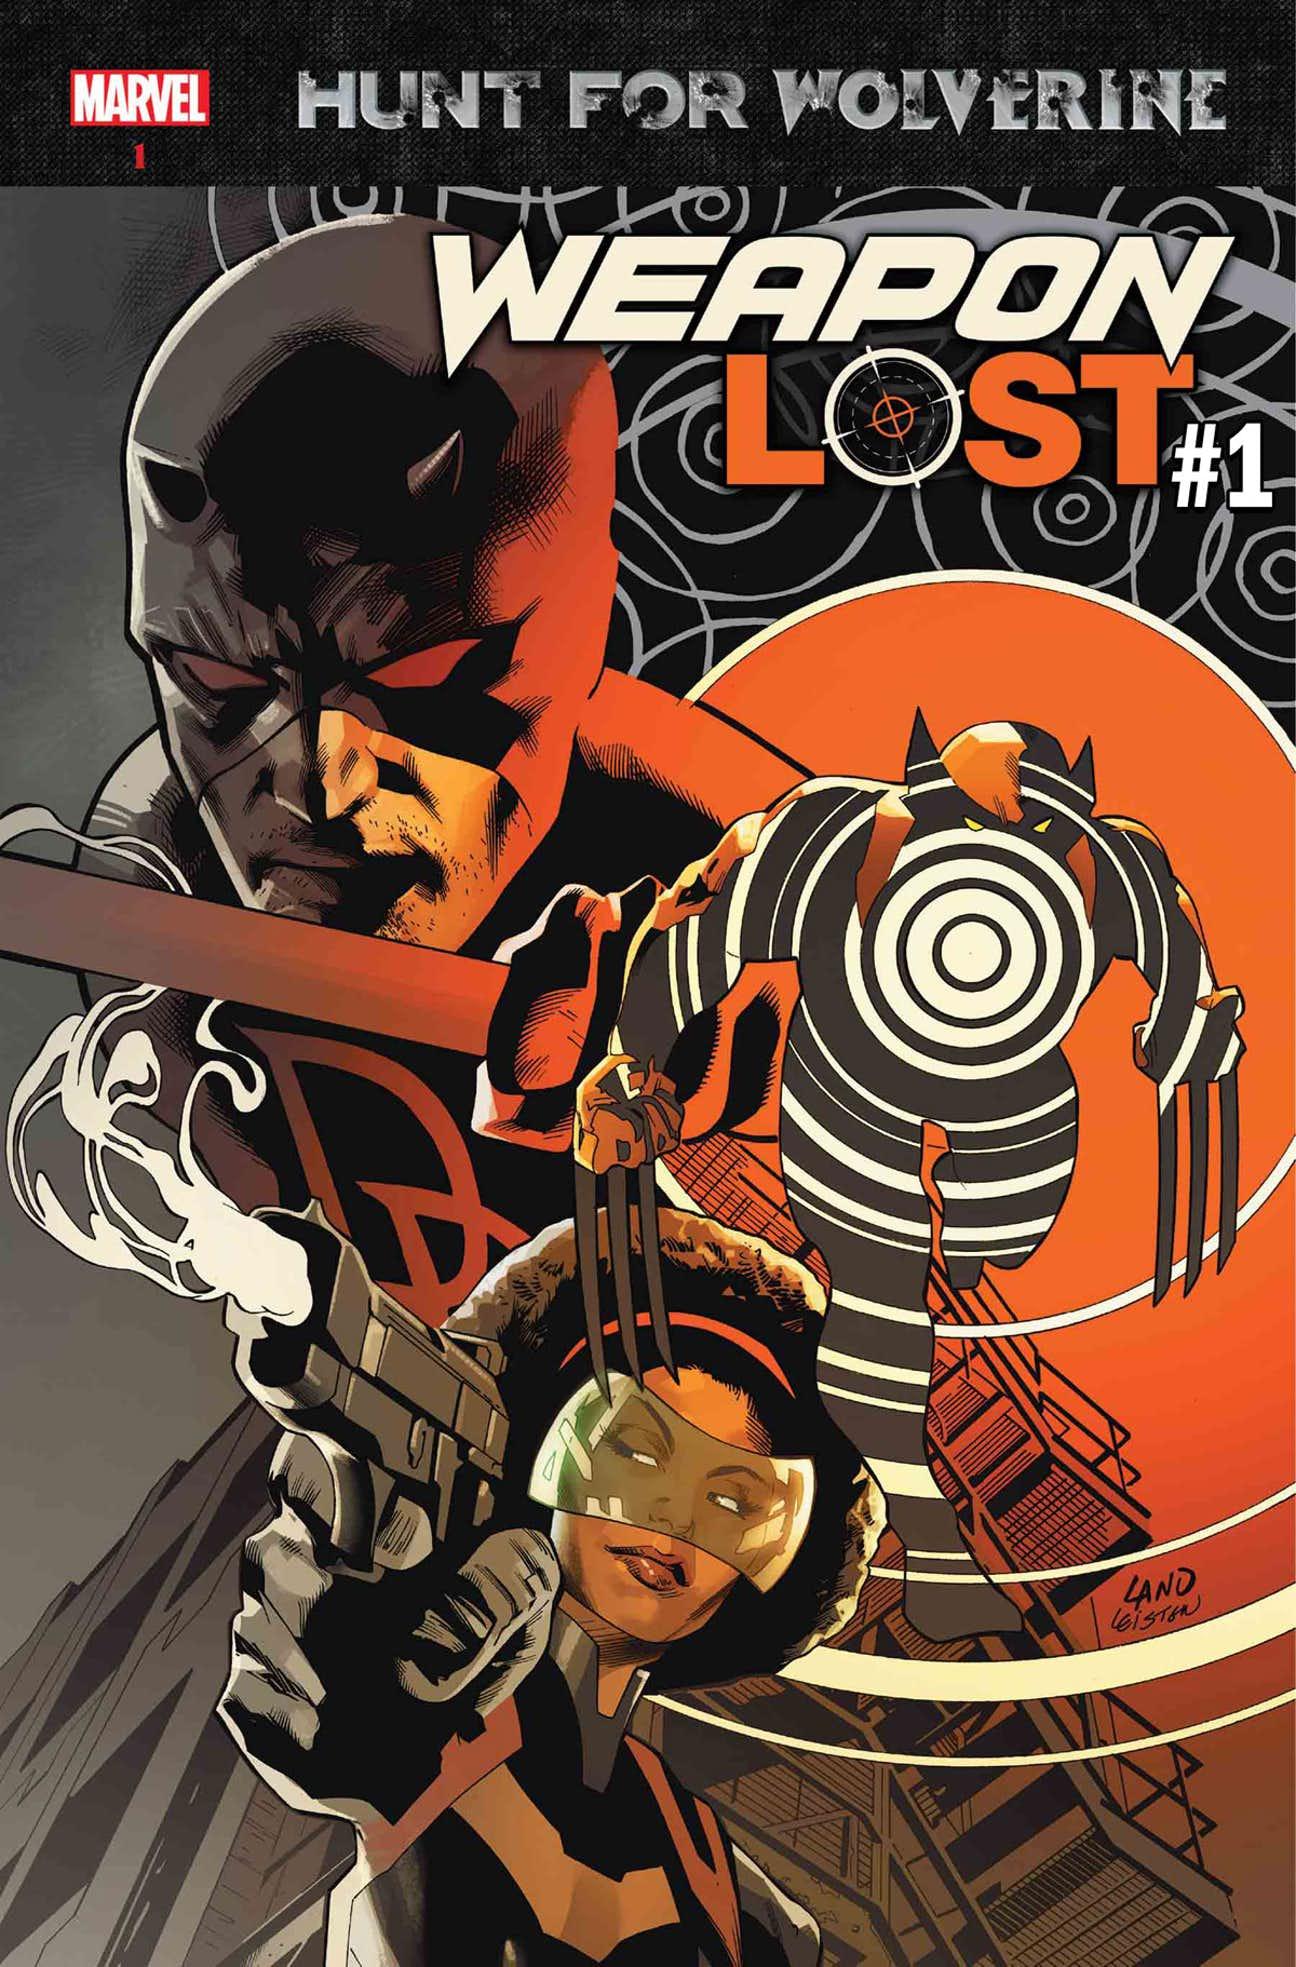 Hunt for Wolverine: Weapon Lost Vol. 1 #1